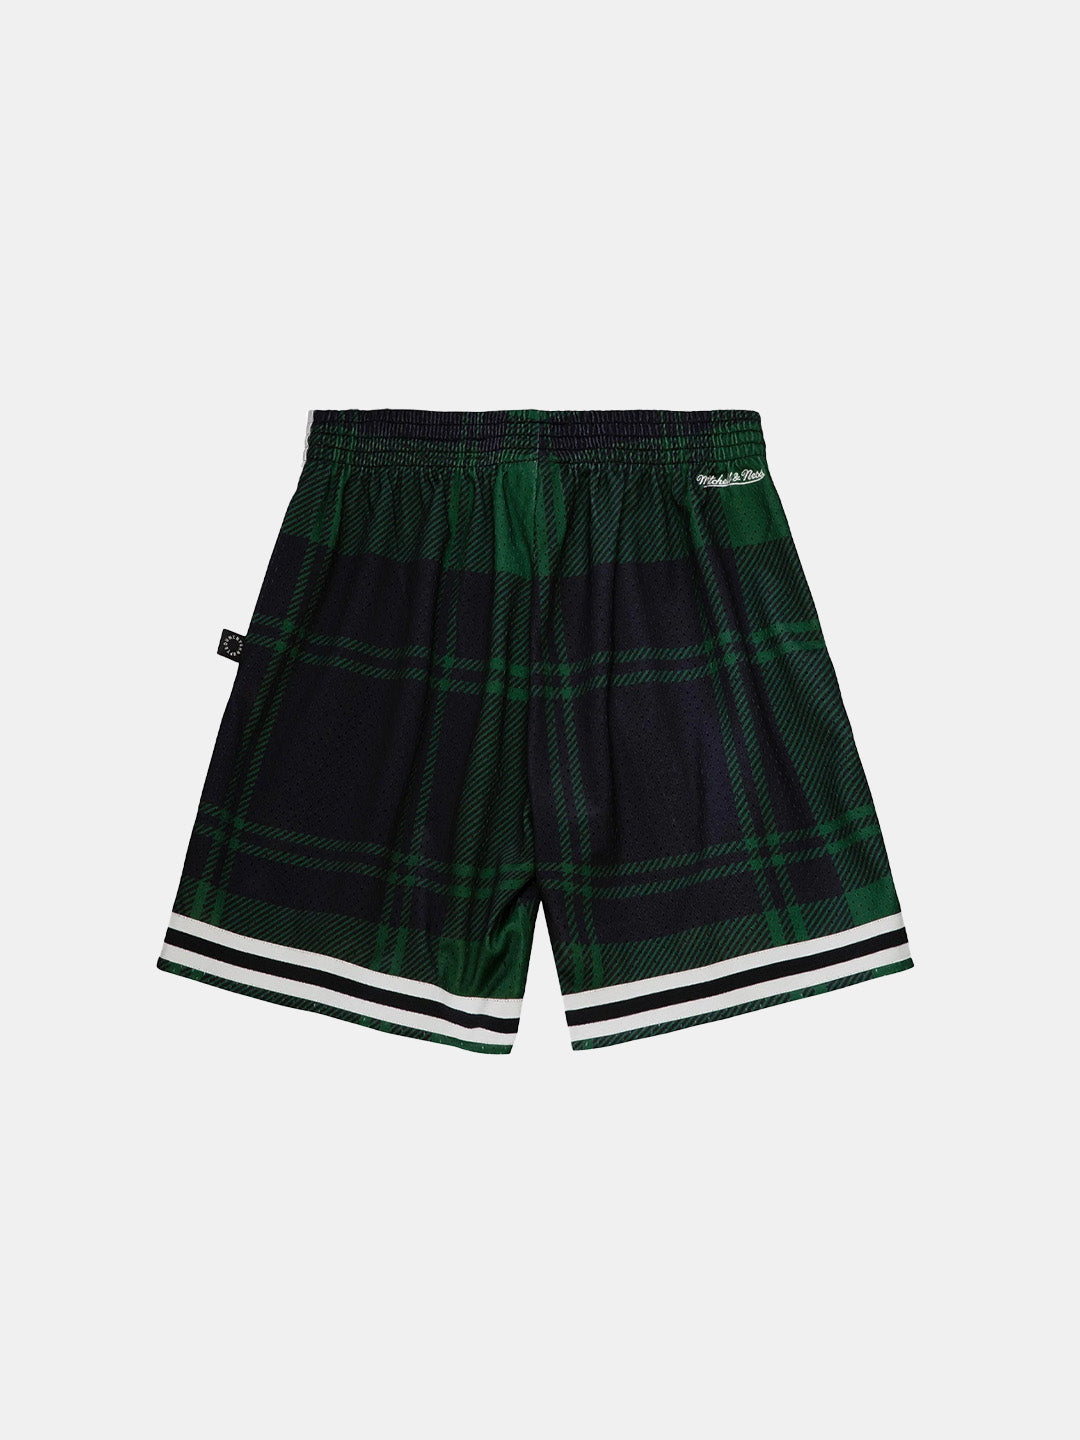 UNINTERRUPTED X Mitchell & Ness Legends Shorts Celtics - back view of the shorts